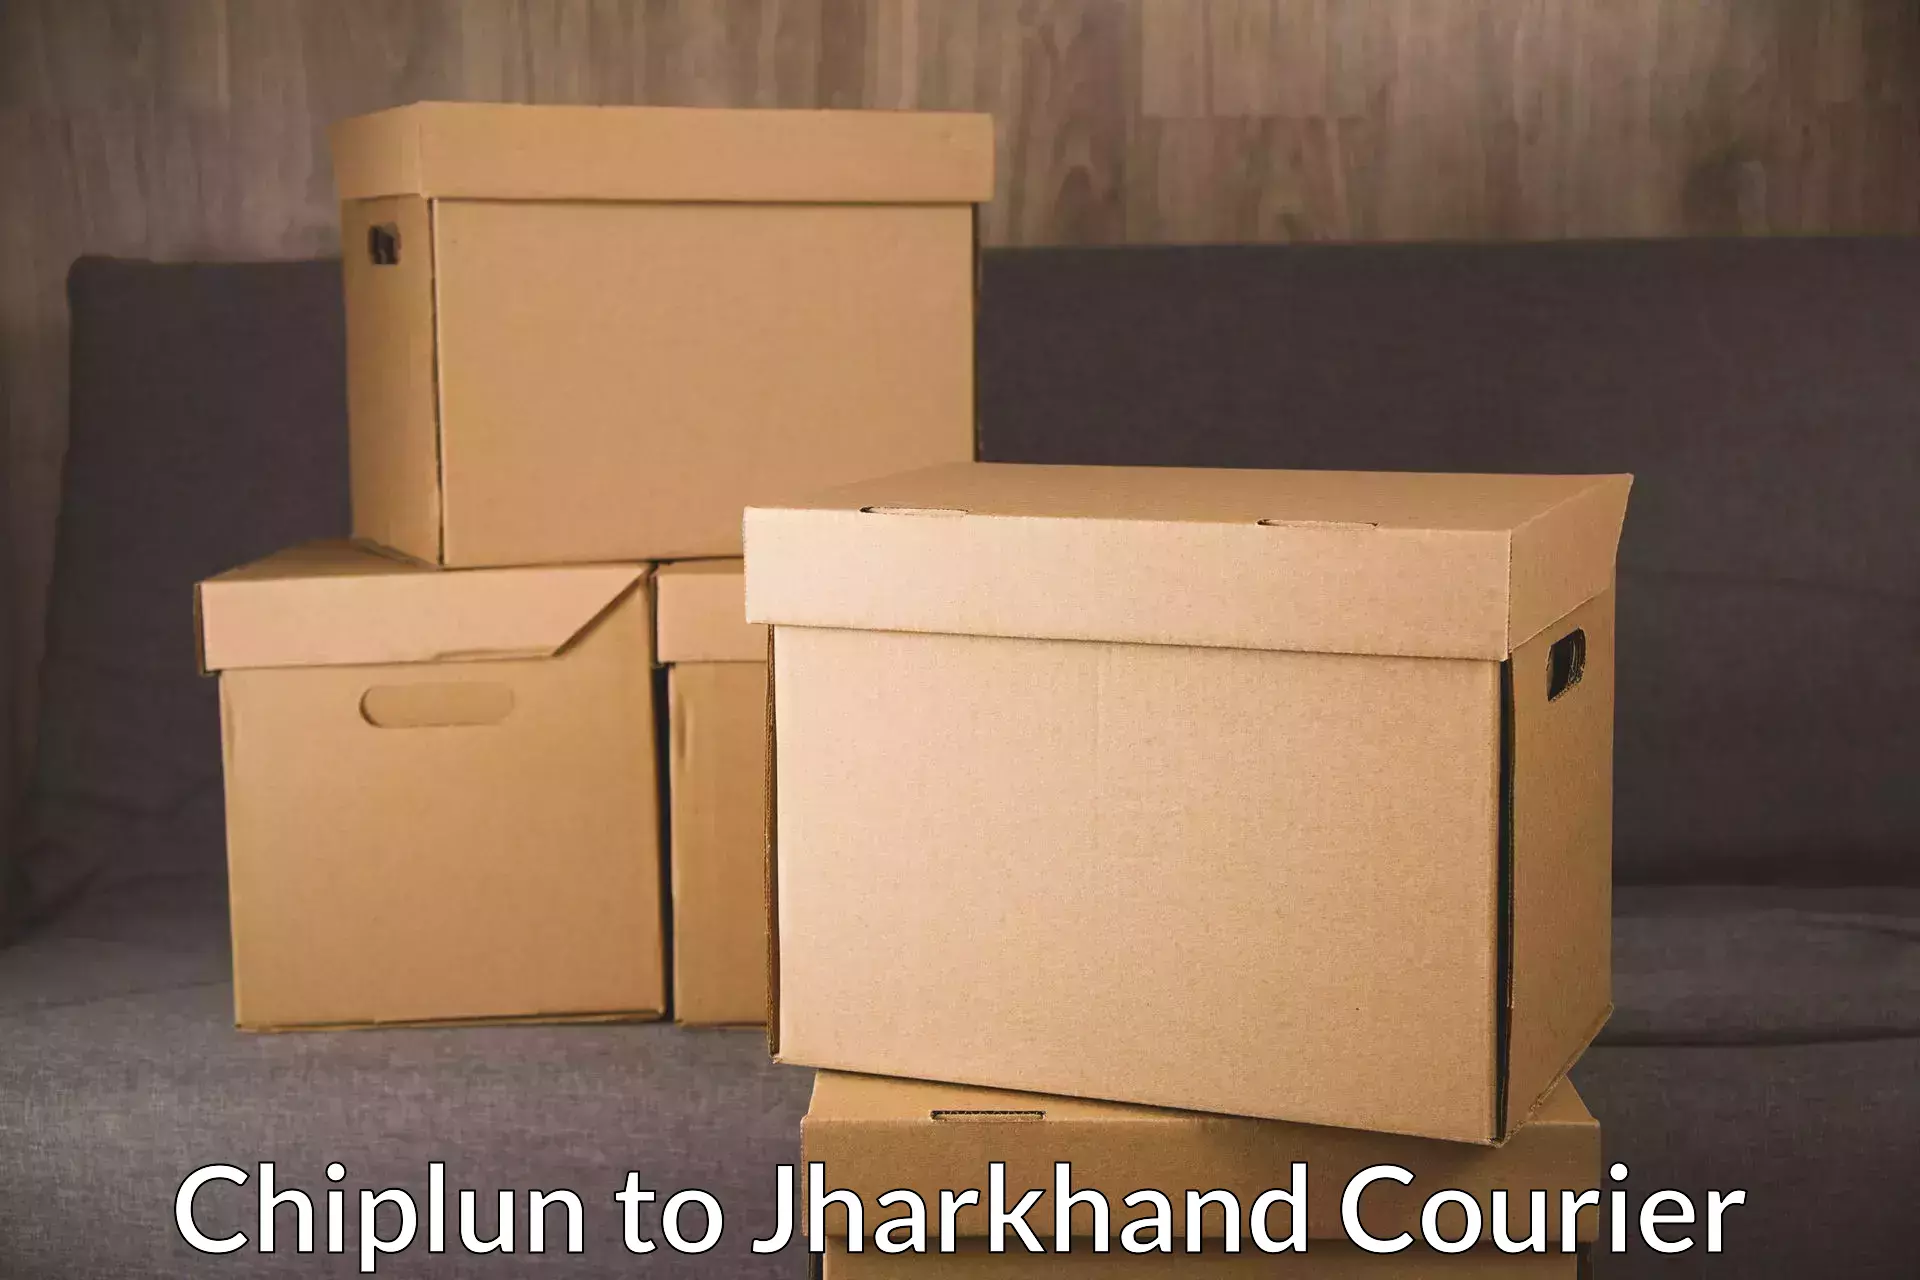 Automated parcel services Chiplun to Jamshedpur